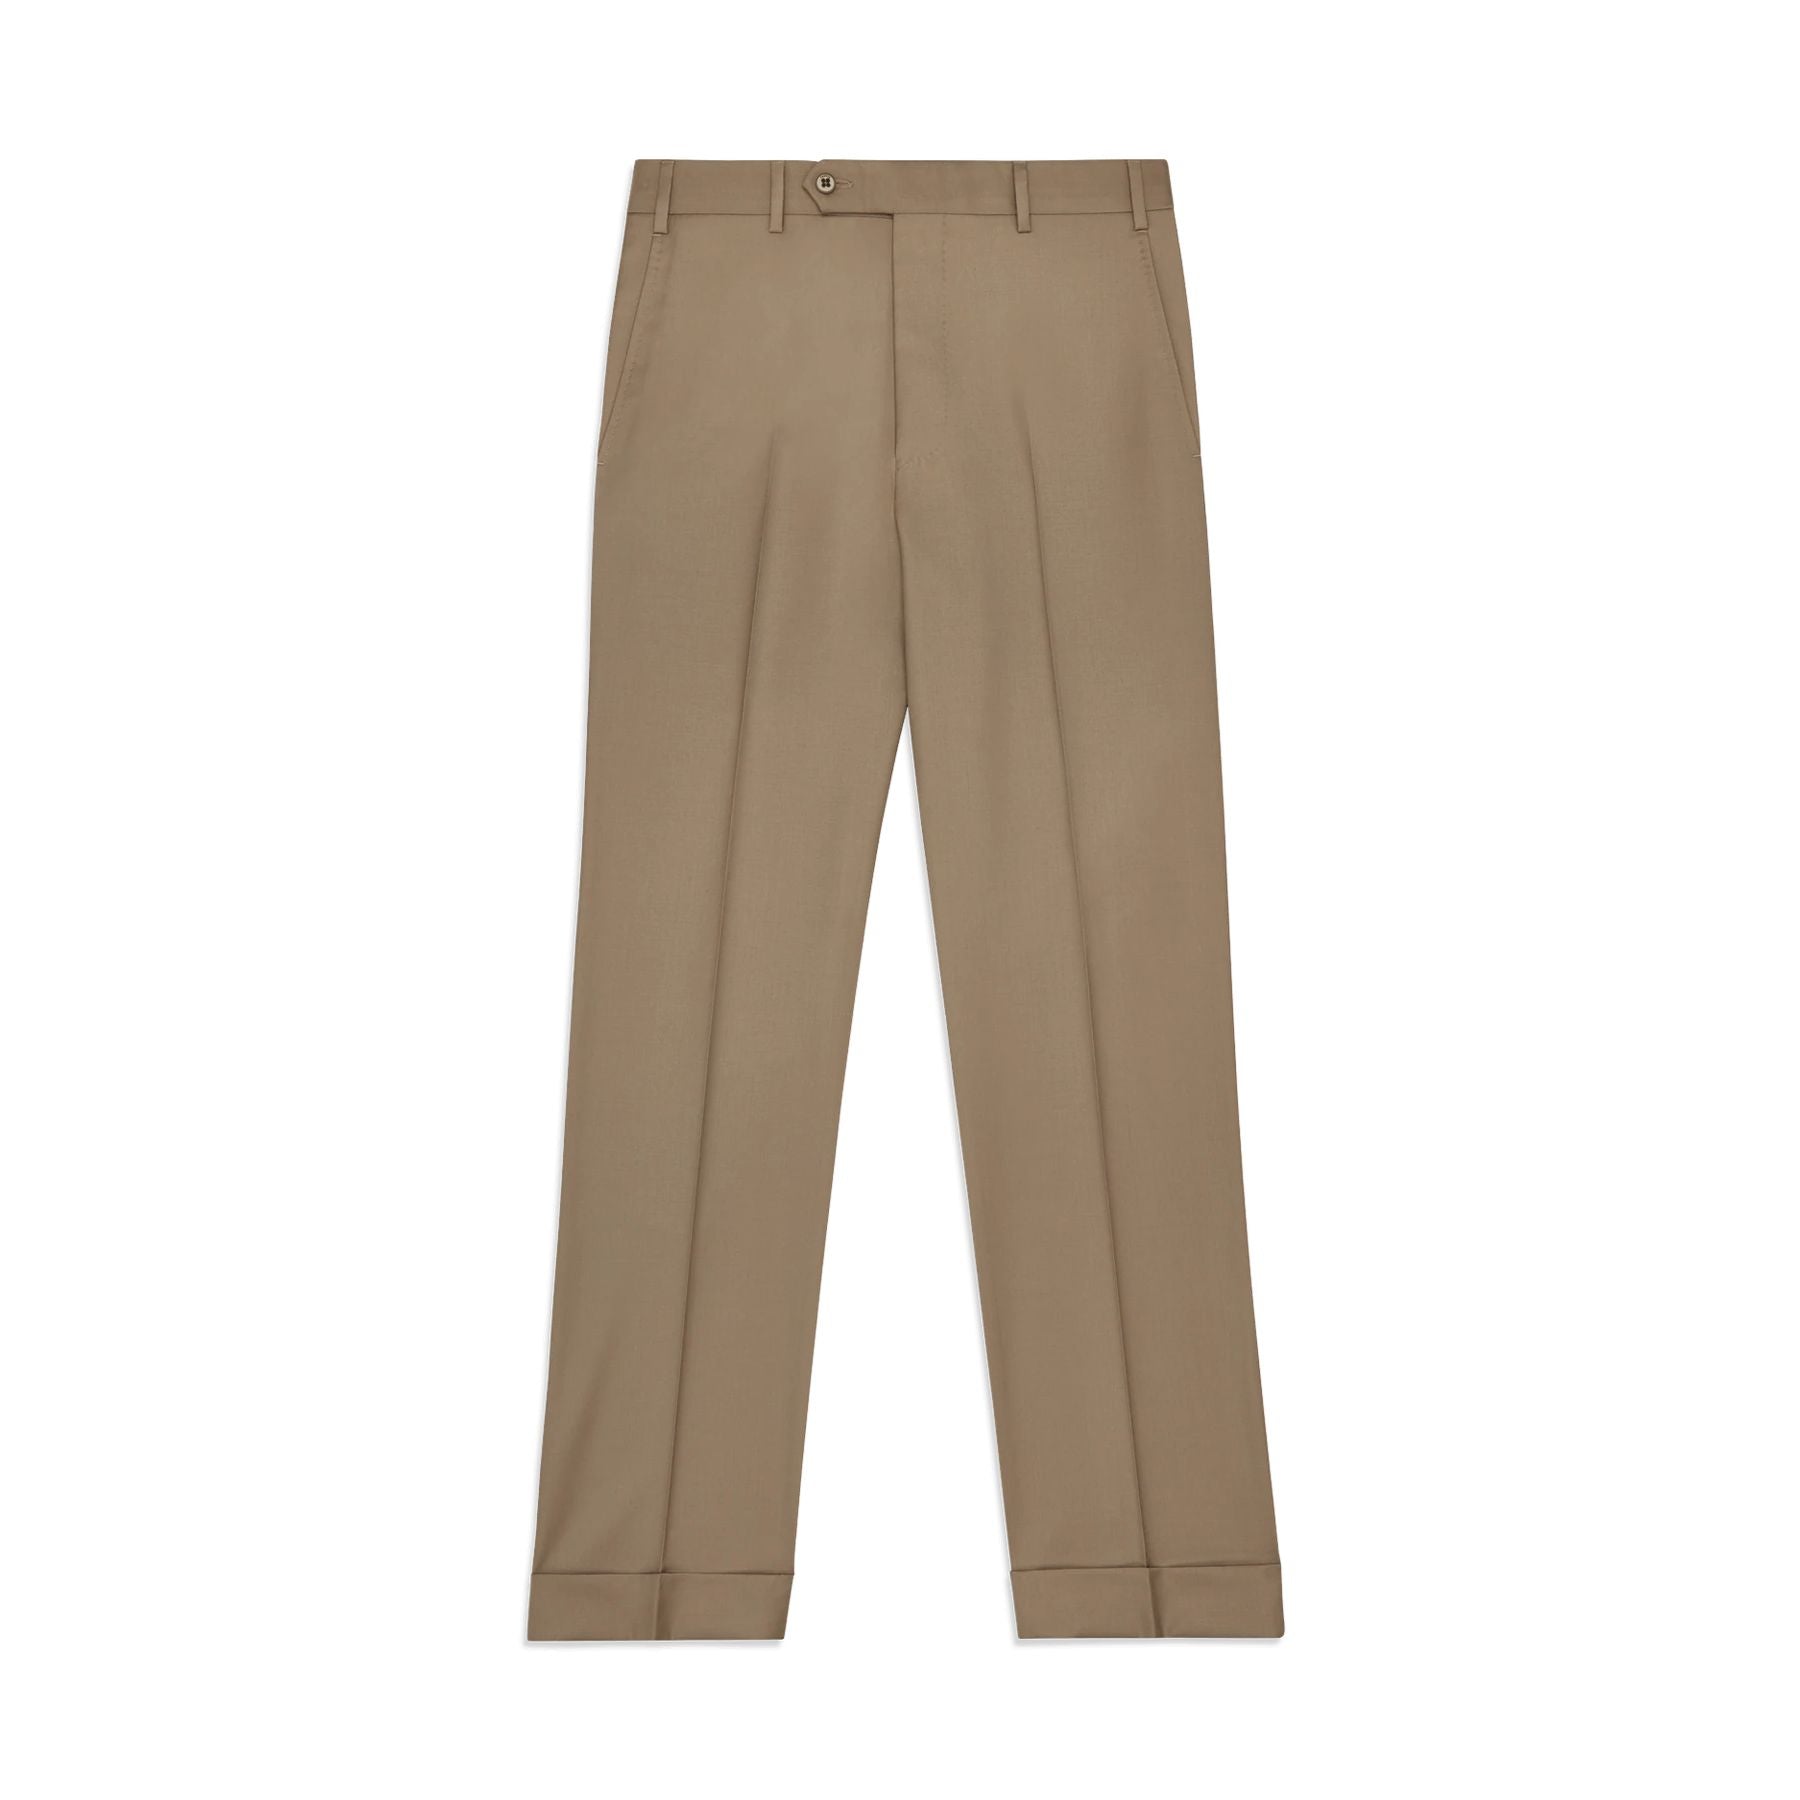 Todd Flat Front Super 120s Wool Serge Trouser in Tan (Full Fit) by Zanella